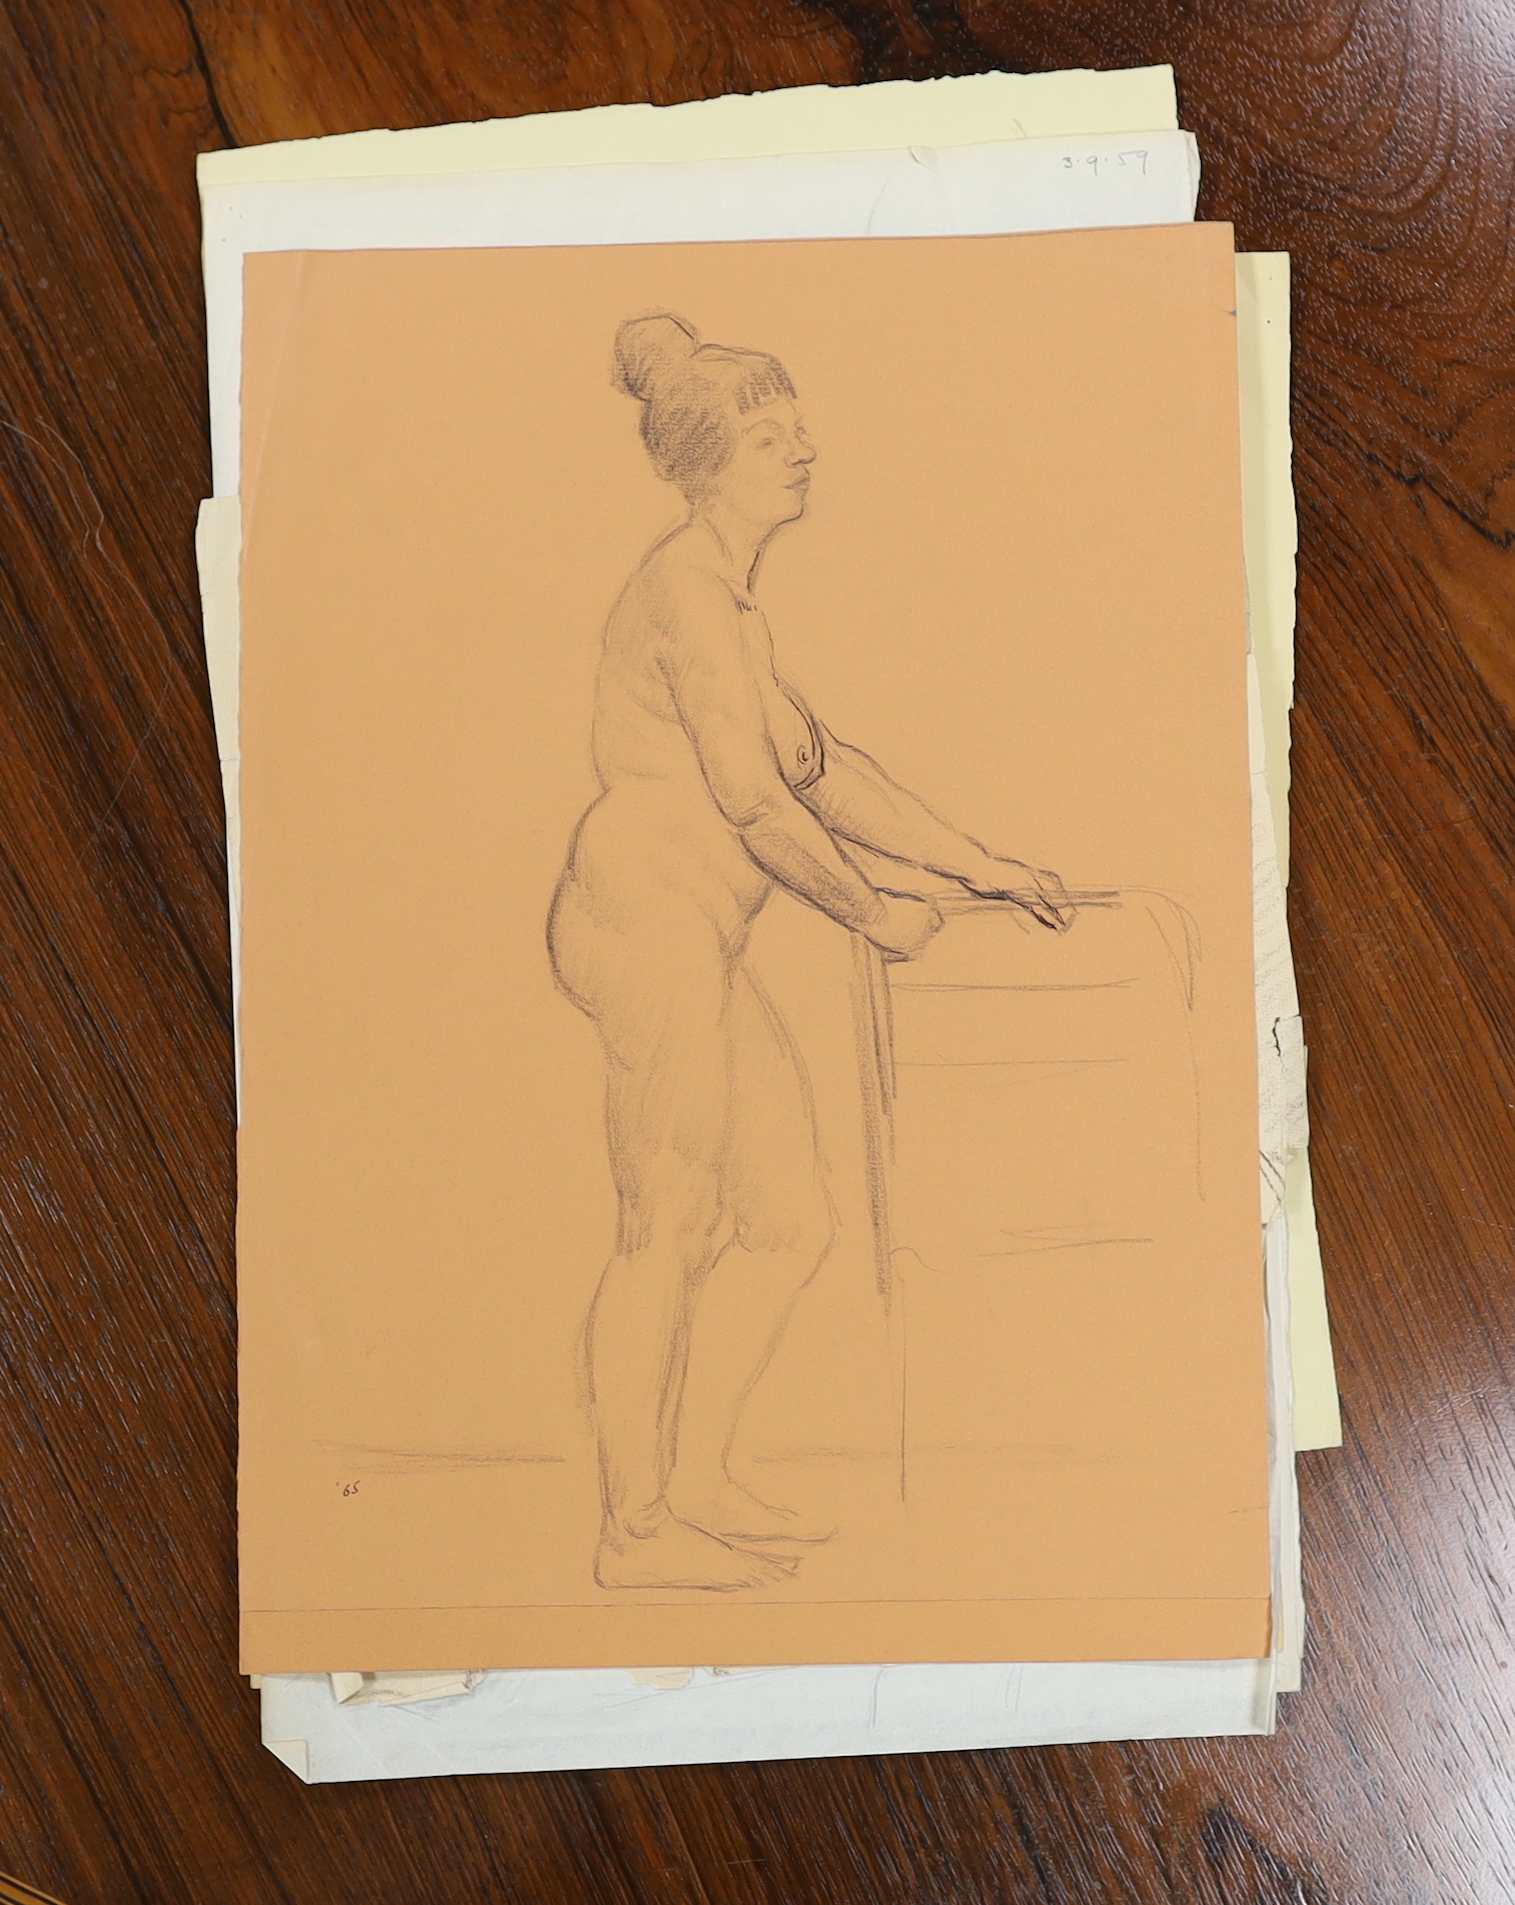 Clifford Hall (1904-1973), nine pen, ink and pencil sketches on paper, Figural studies and nudes, one signed, some dated, unframed, largest 39 x 28cm